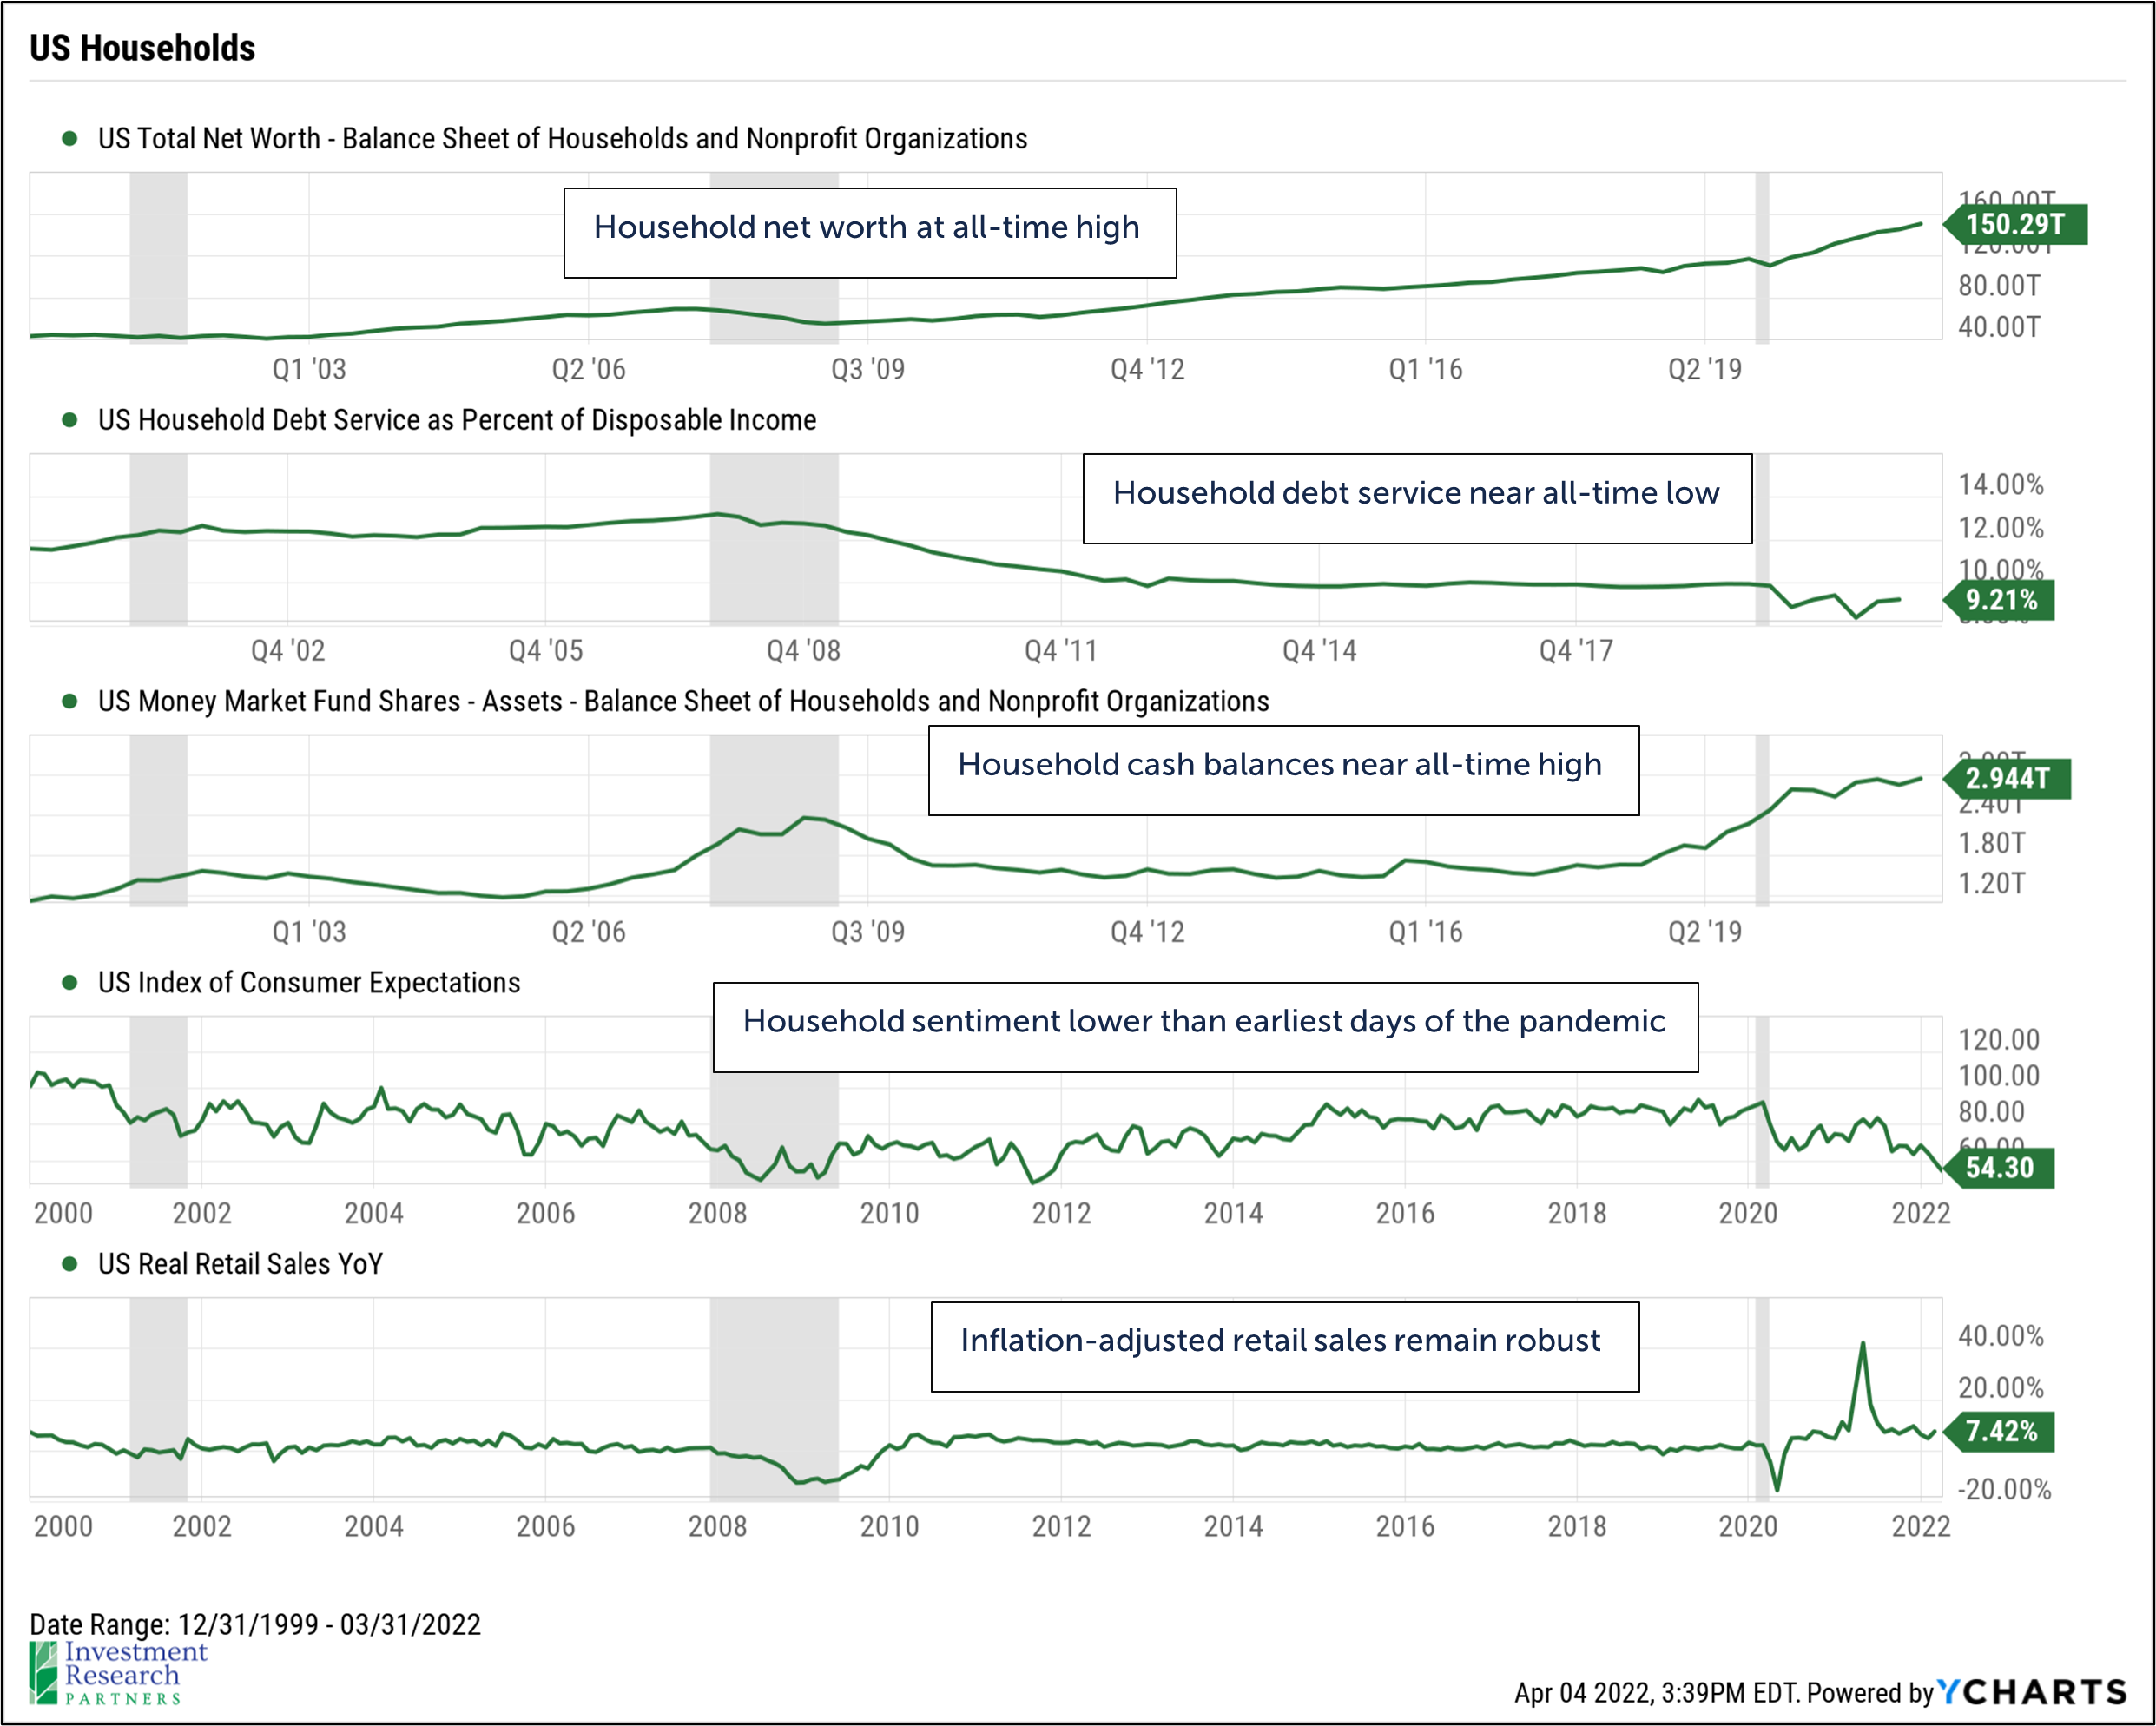 Line graphs depicting US Households, including US Total Net Worth - Balance Sheet of Households and Nonprofit Organizations, US Household Debt Service as Percent of Disposable Income, US Money Market Fund Shares - Assets - Balance Sheet of Households and Nonprofit Organizations, US Index of Consumer Expectations, and US Real Retail Sales YoY